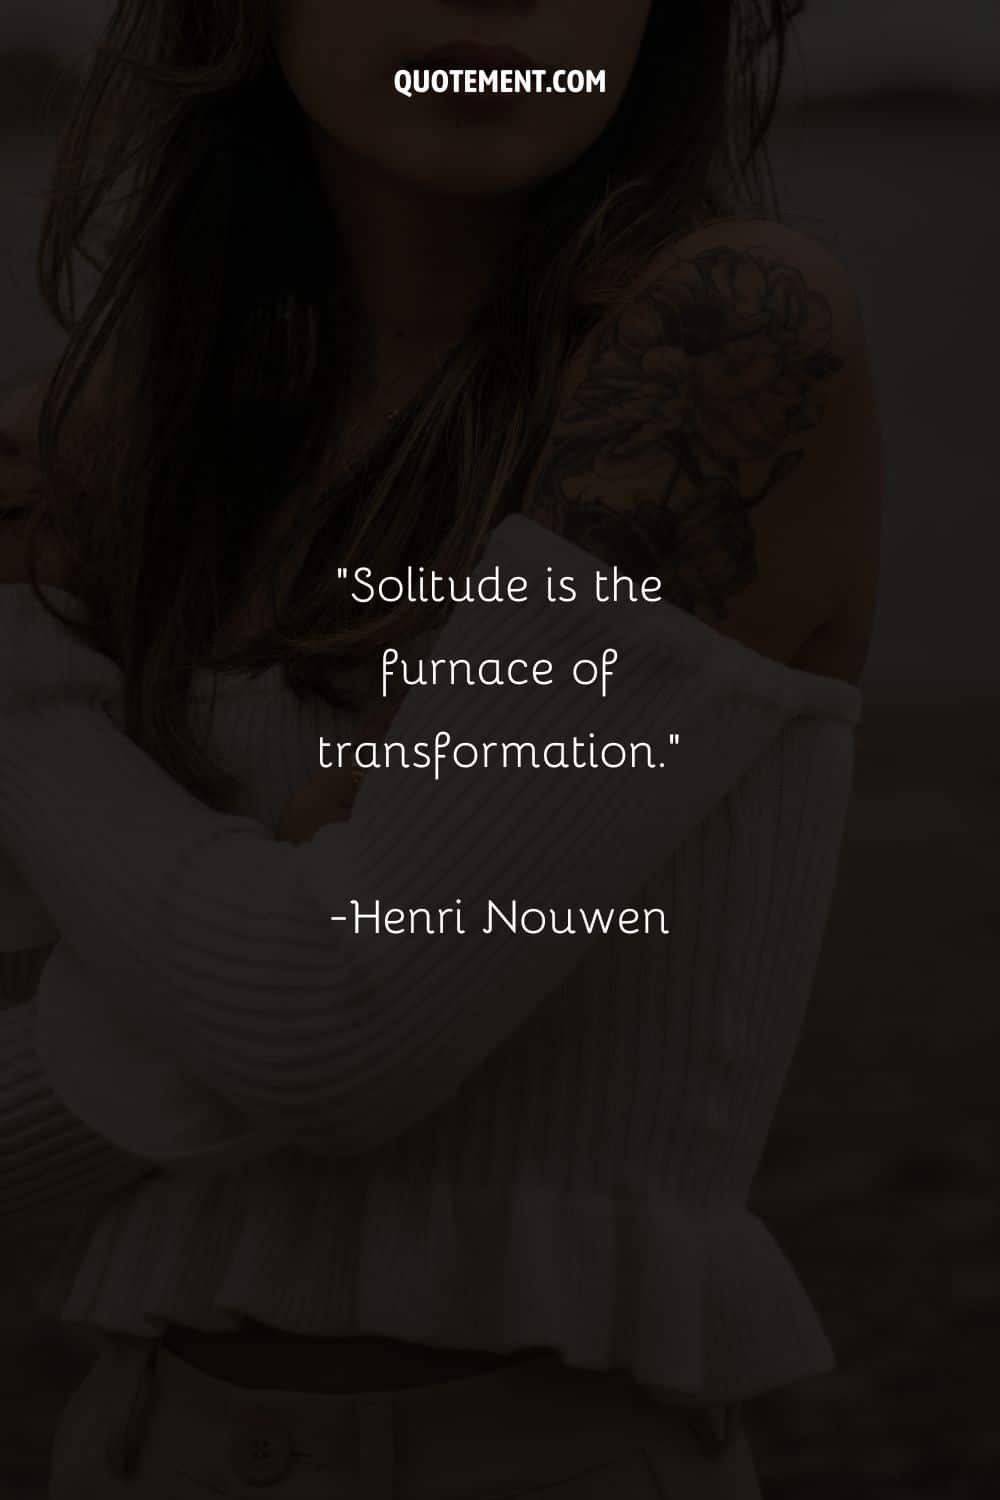 Image of a woman with flowing hair, dressed in white representing solitude quote